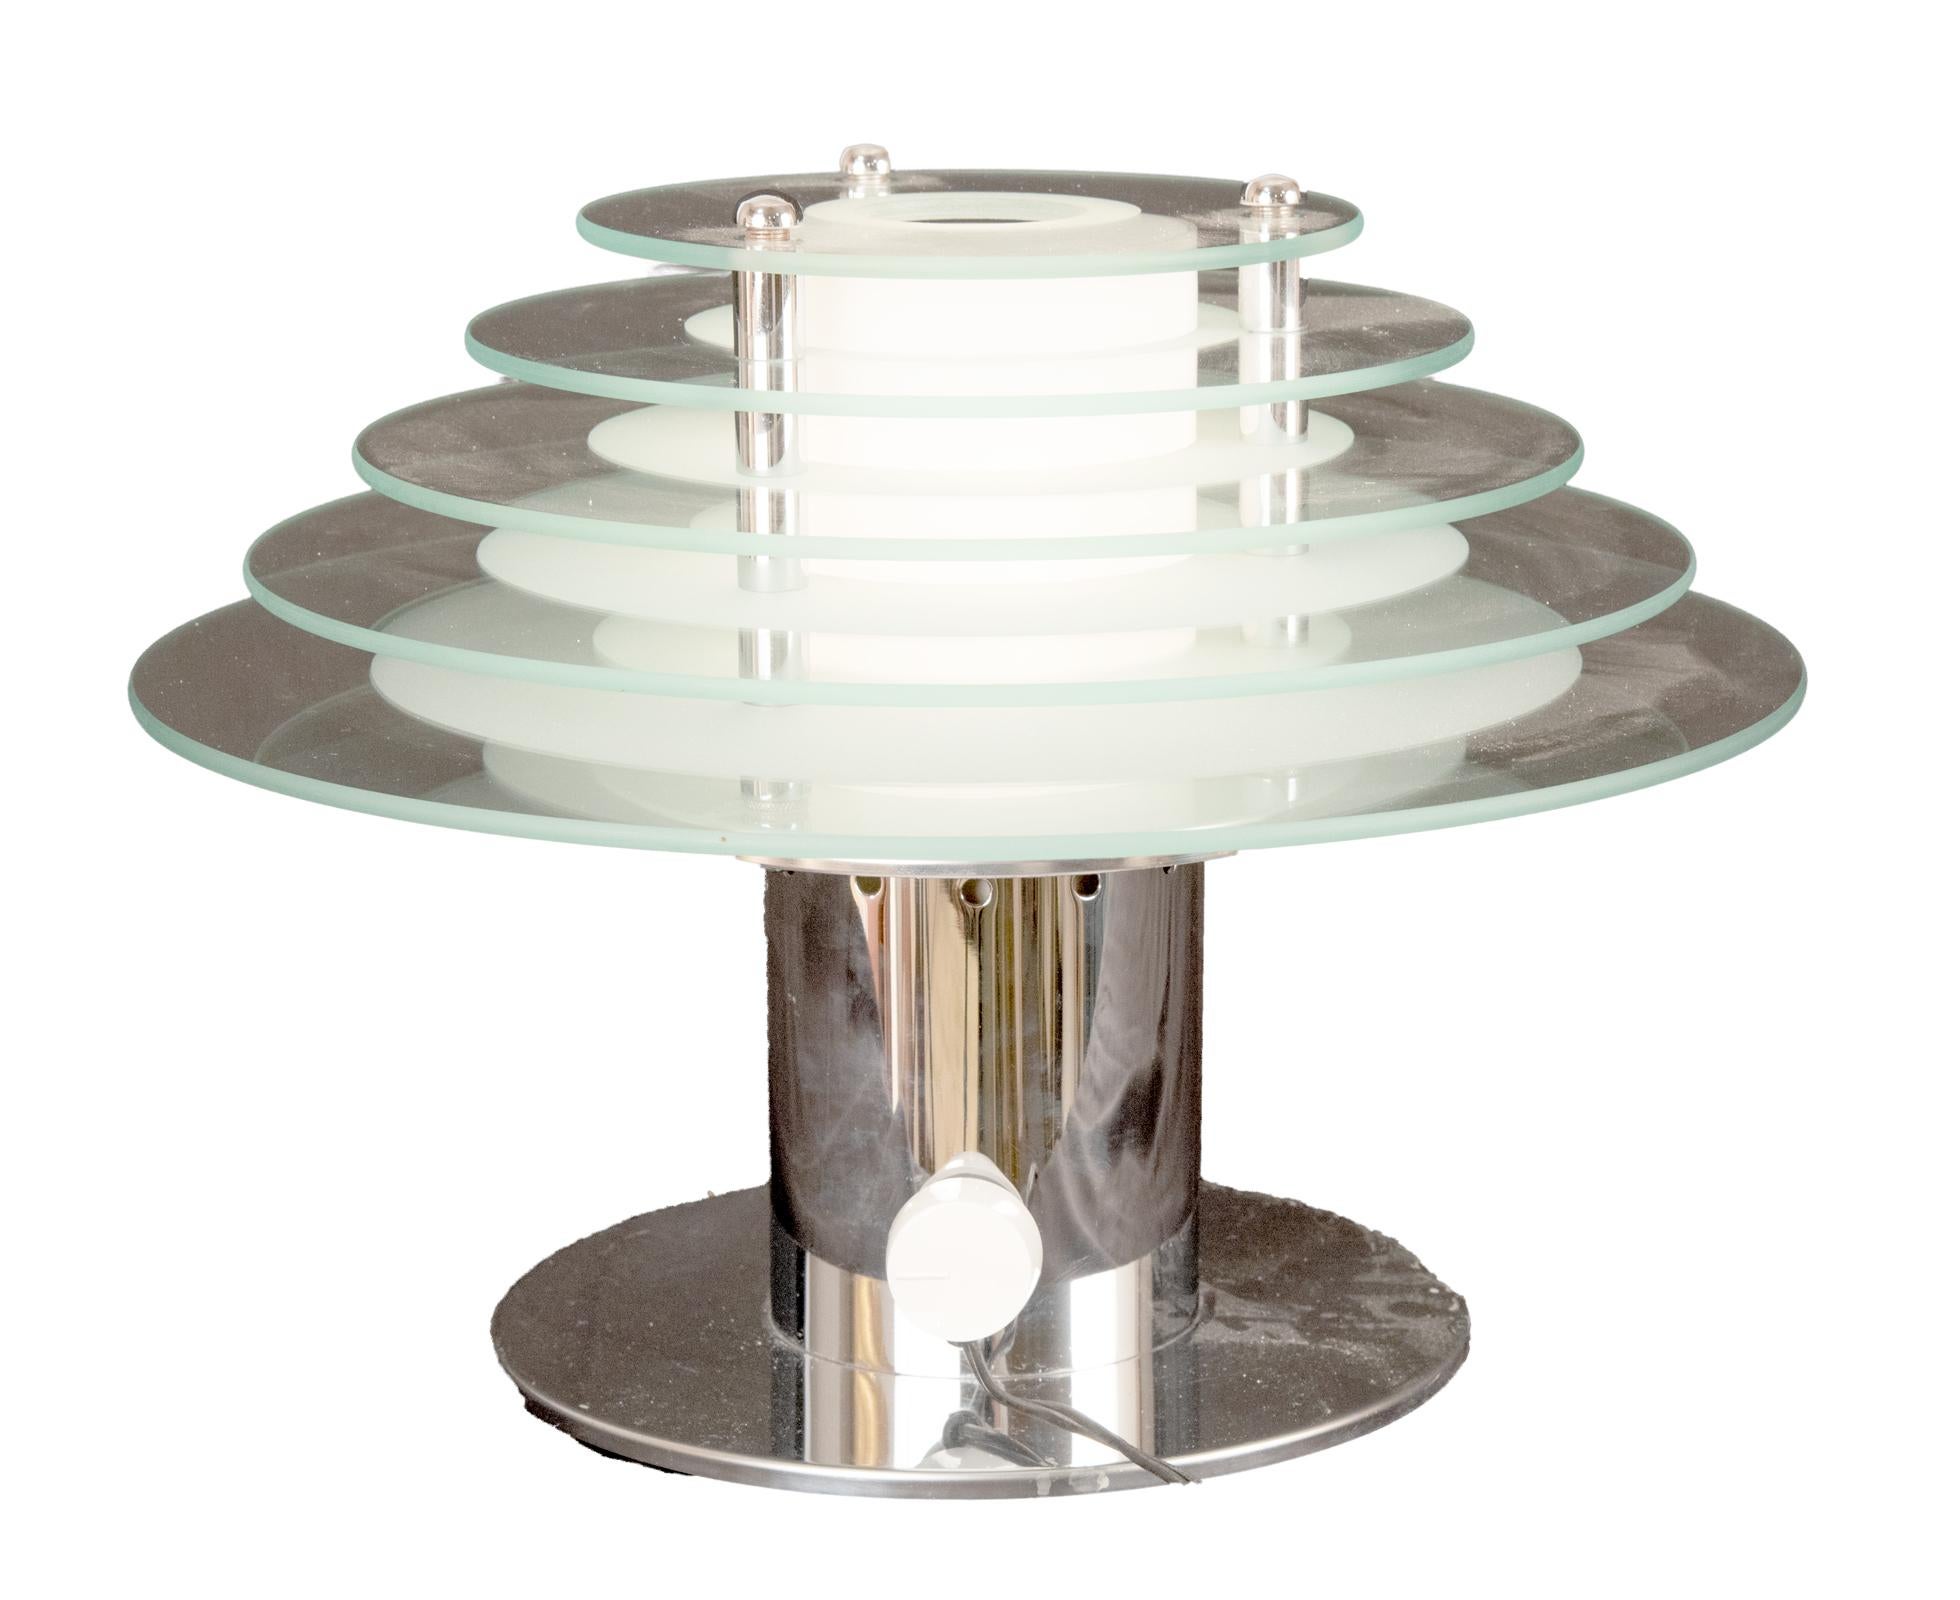 Inspired by the clean geometric lines of the Art Deco period, this rare pair of table lamps designed by Robert Sonneman for George Kovacs in 1987 represents the quintessential 1980s style. Chrome disk and cylinder bases support five graduated